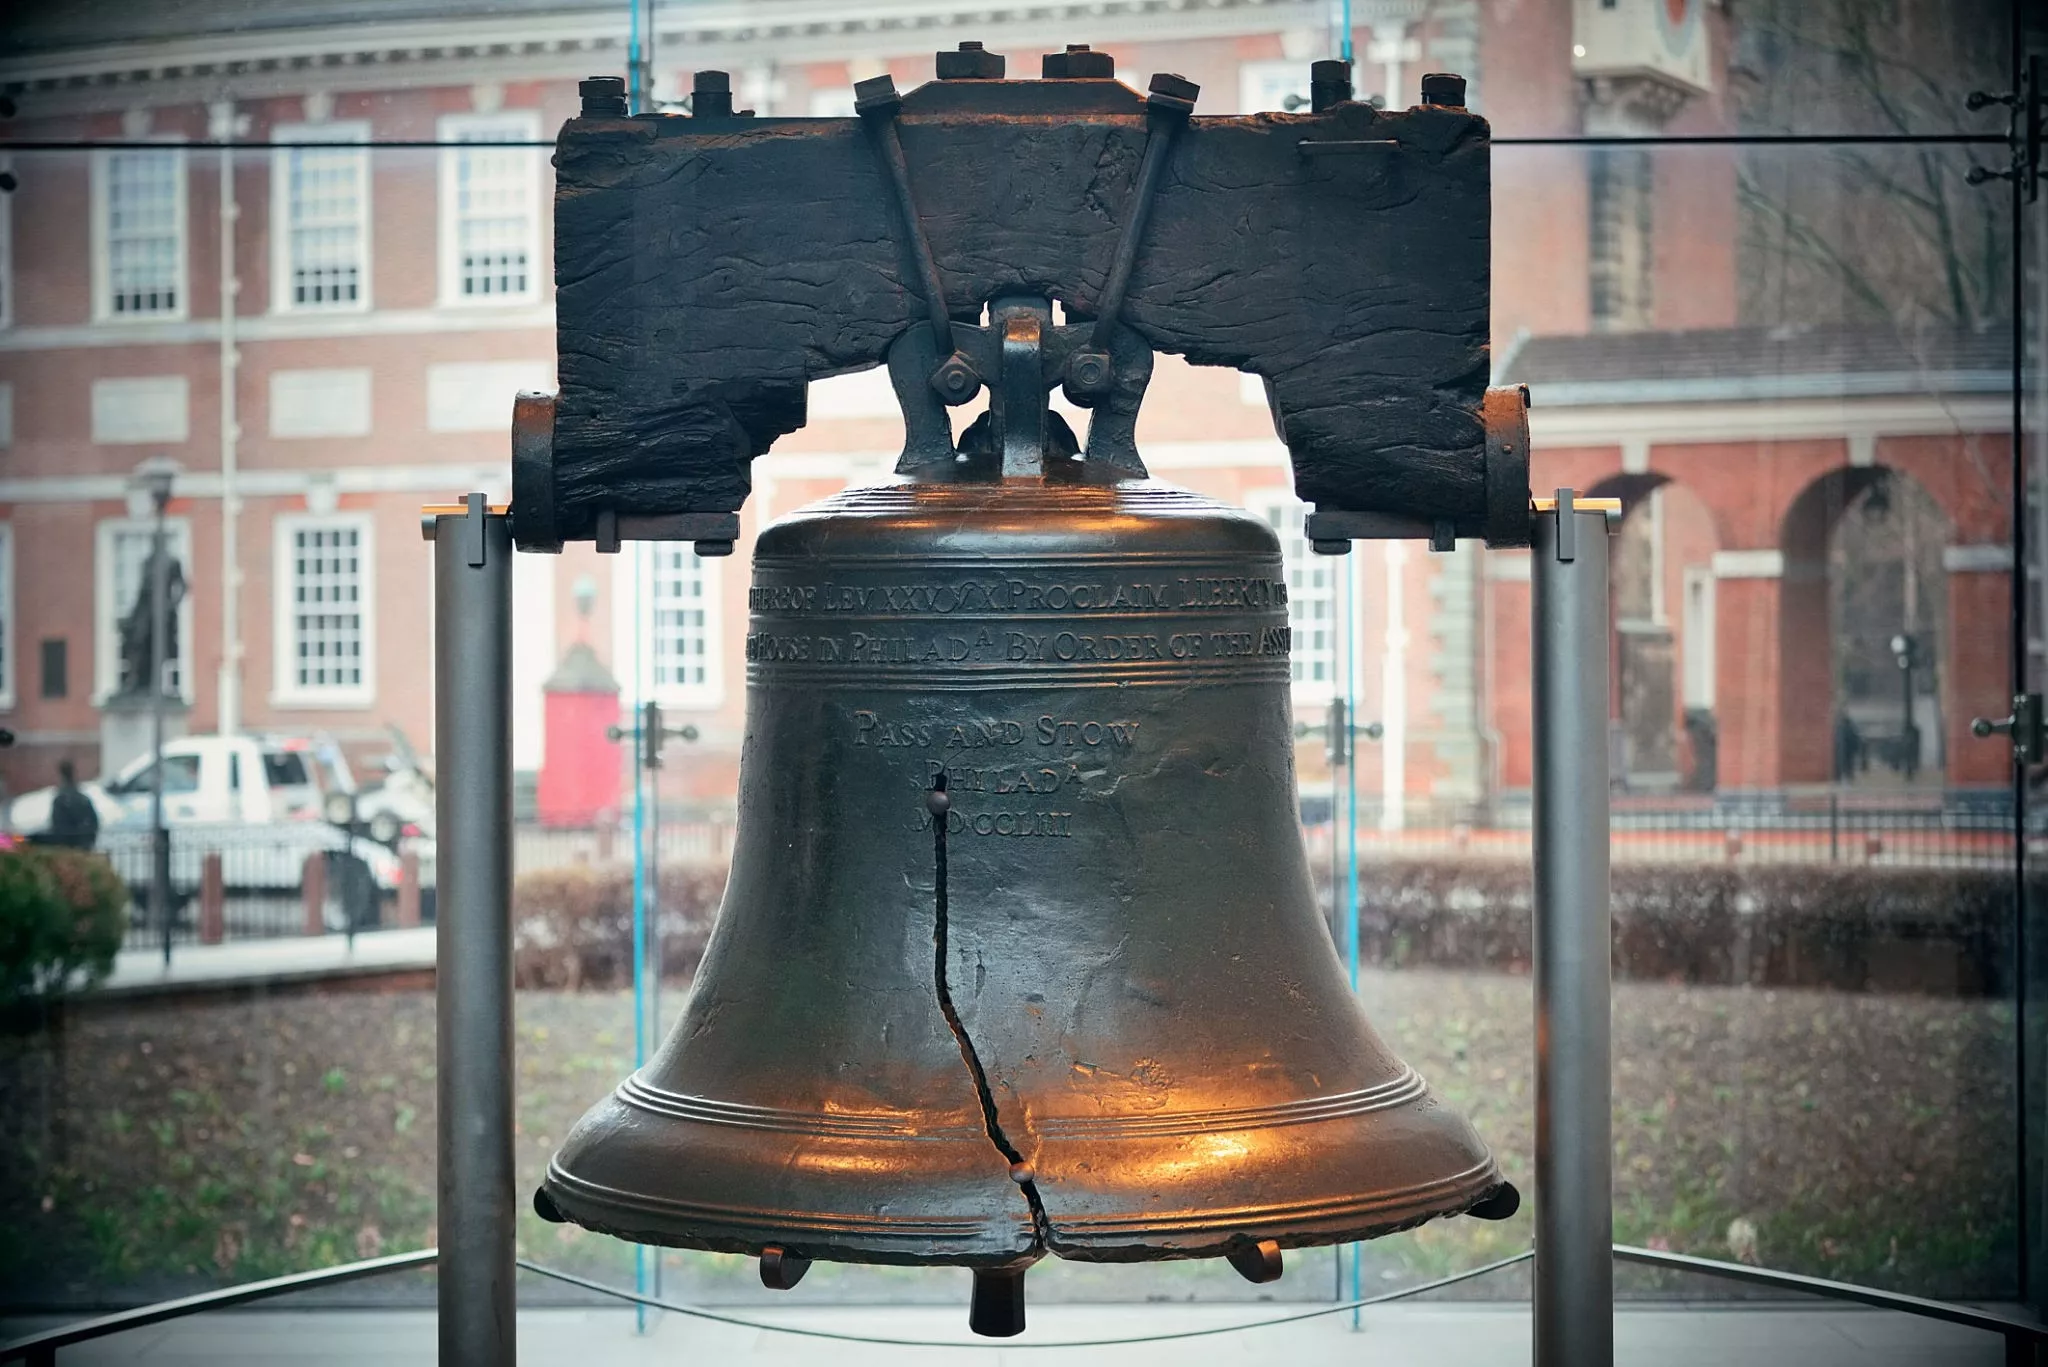 Liberty Bell in USA, North America | Monuments - Rated 4.6